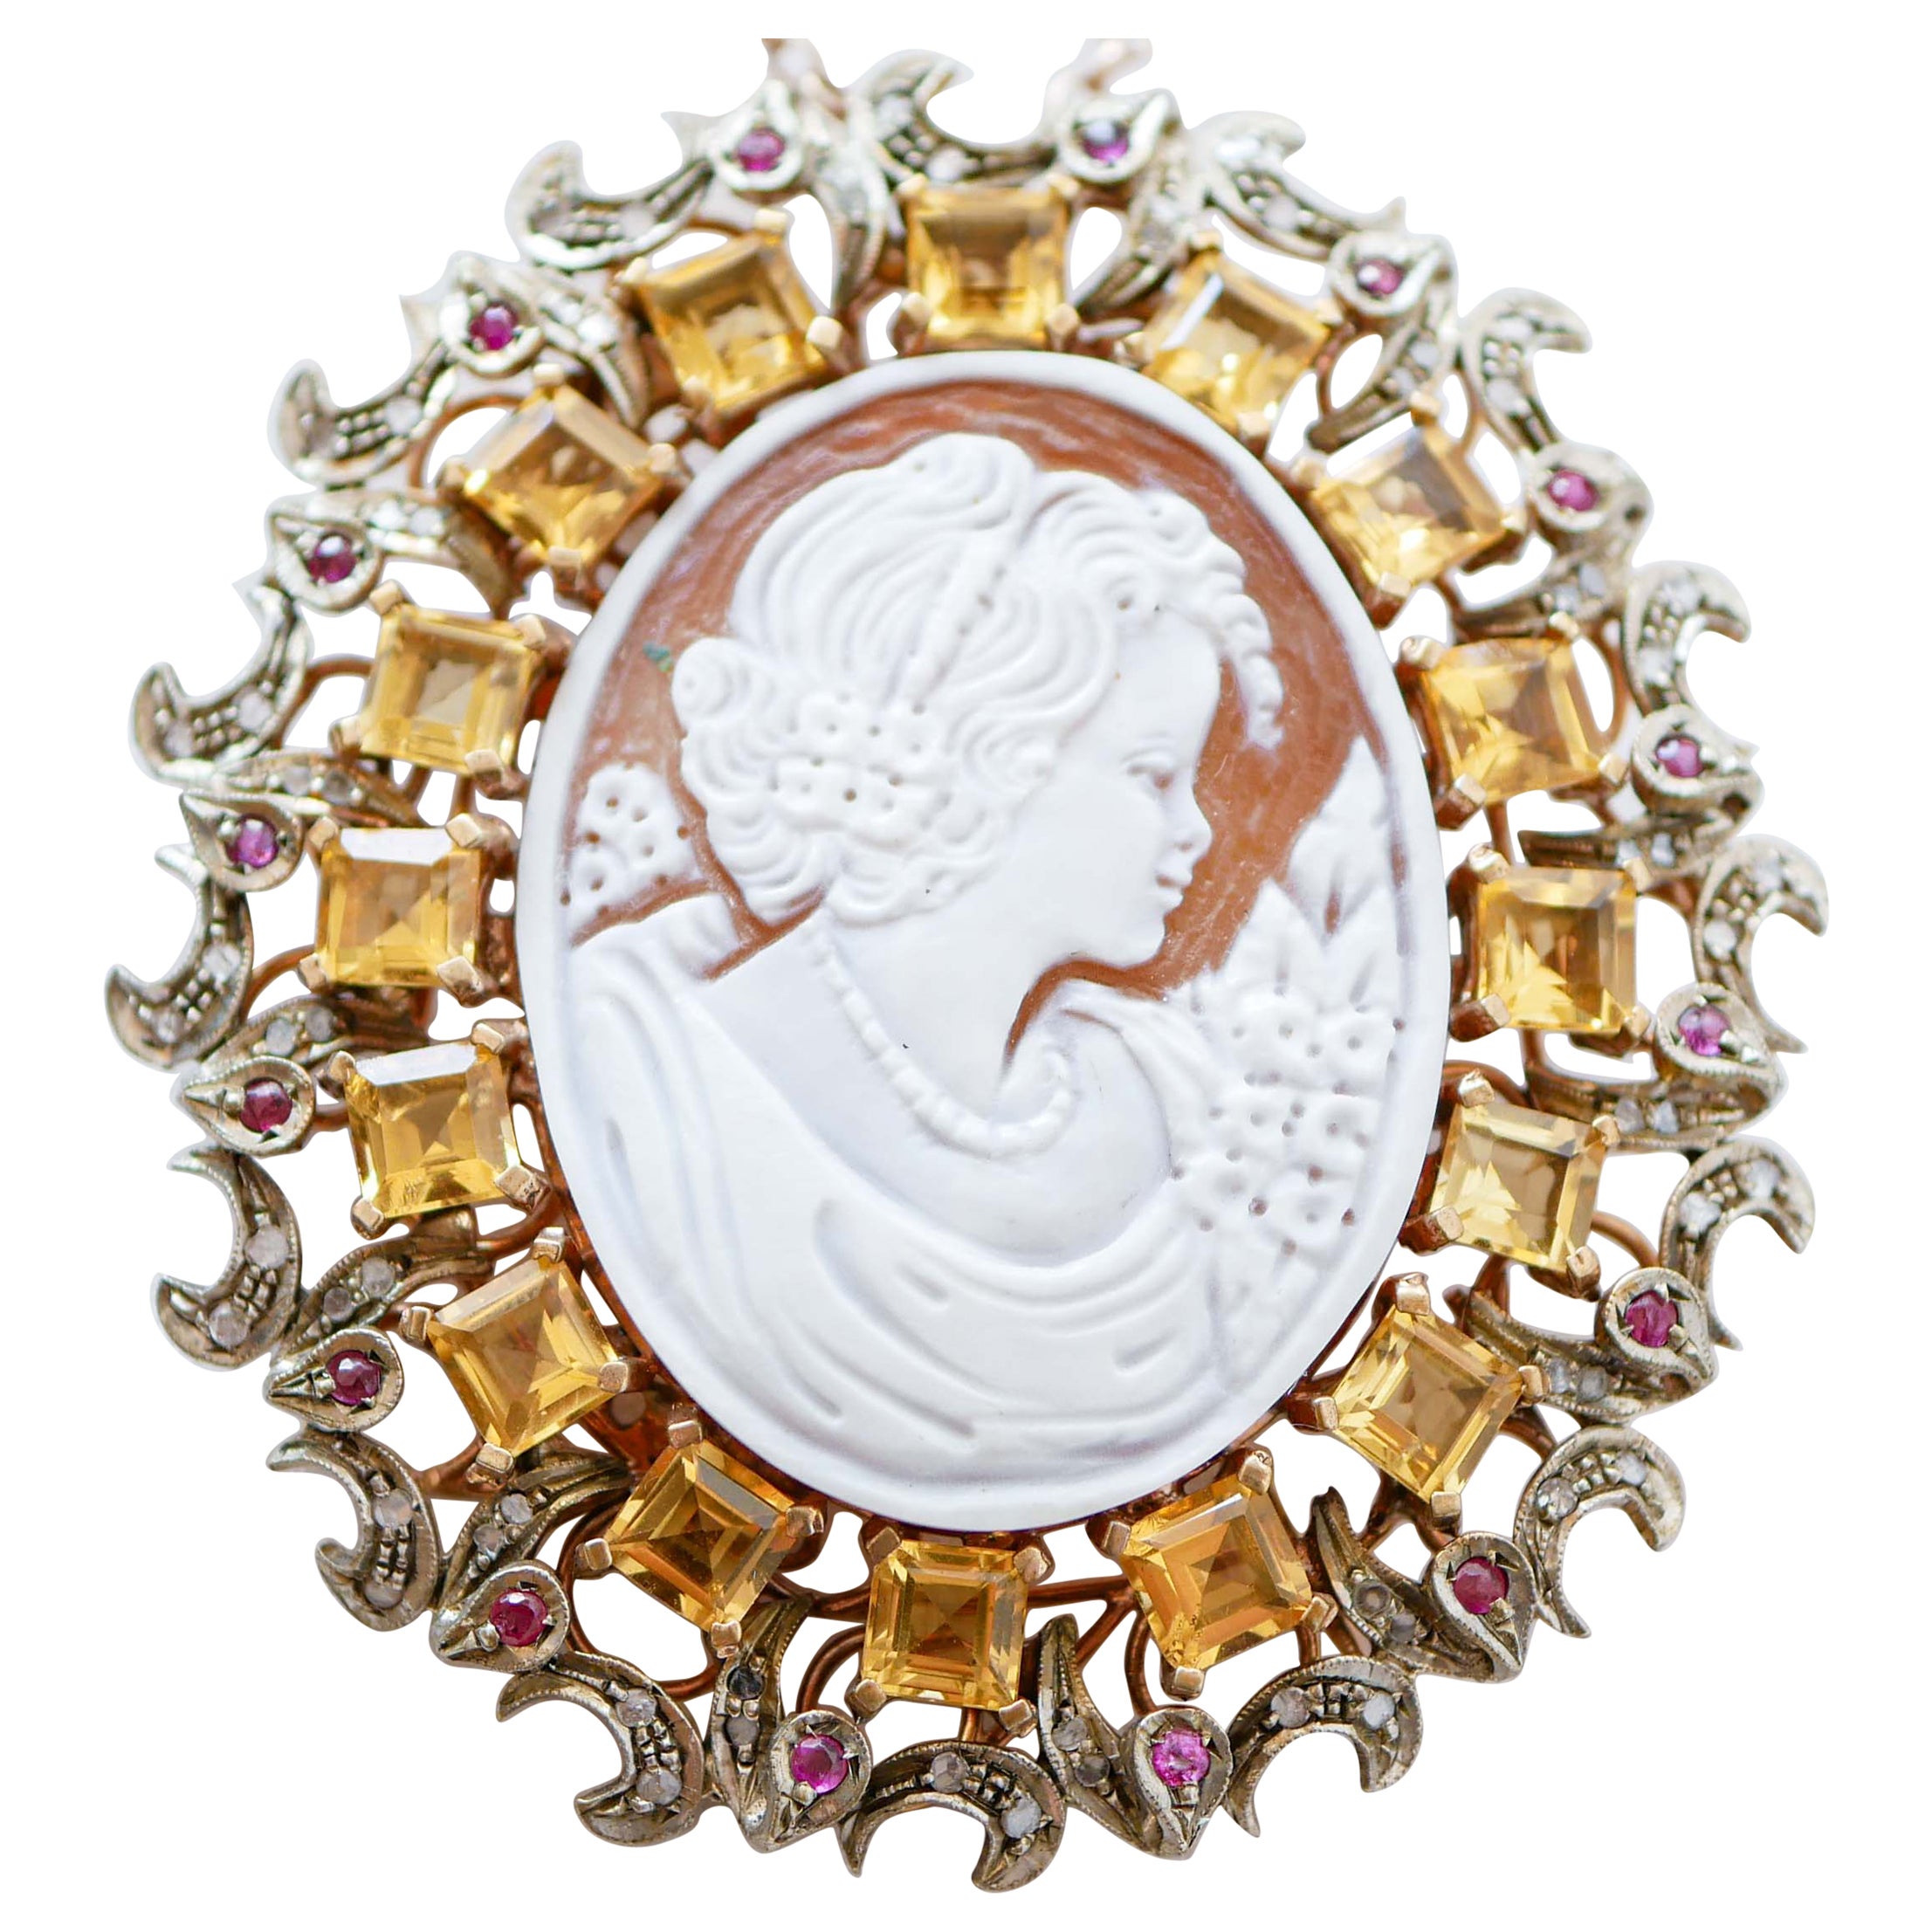 Cameo, Topazs, Rubies, Diamonds, Rose Gold and Silver Brooch/Pendant.